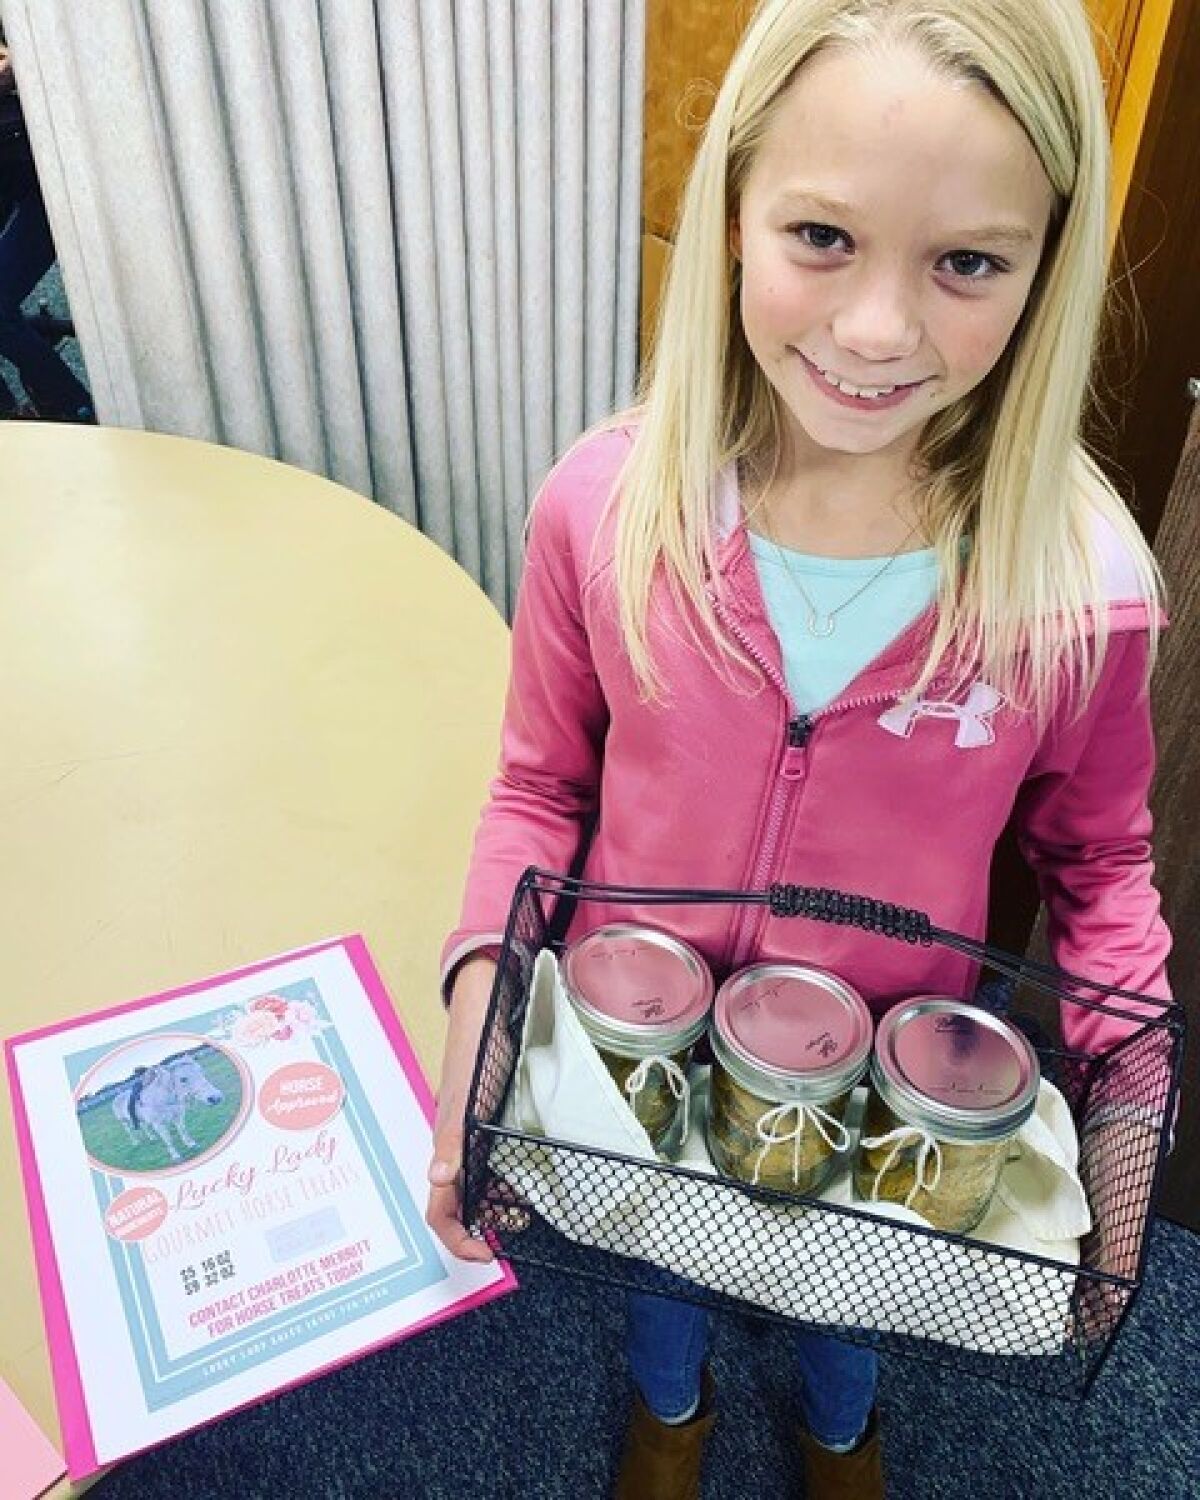 Charlie Merritt, 9, proudly displays some of her homemade horse treats.